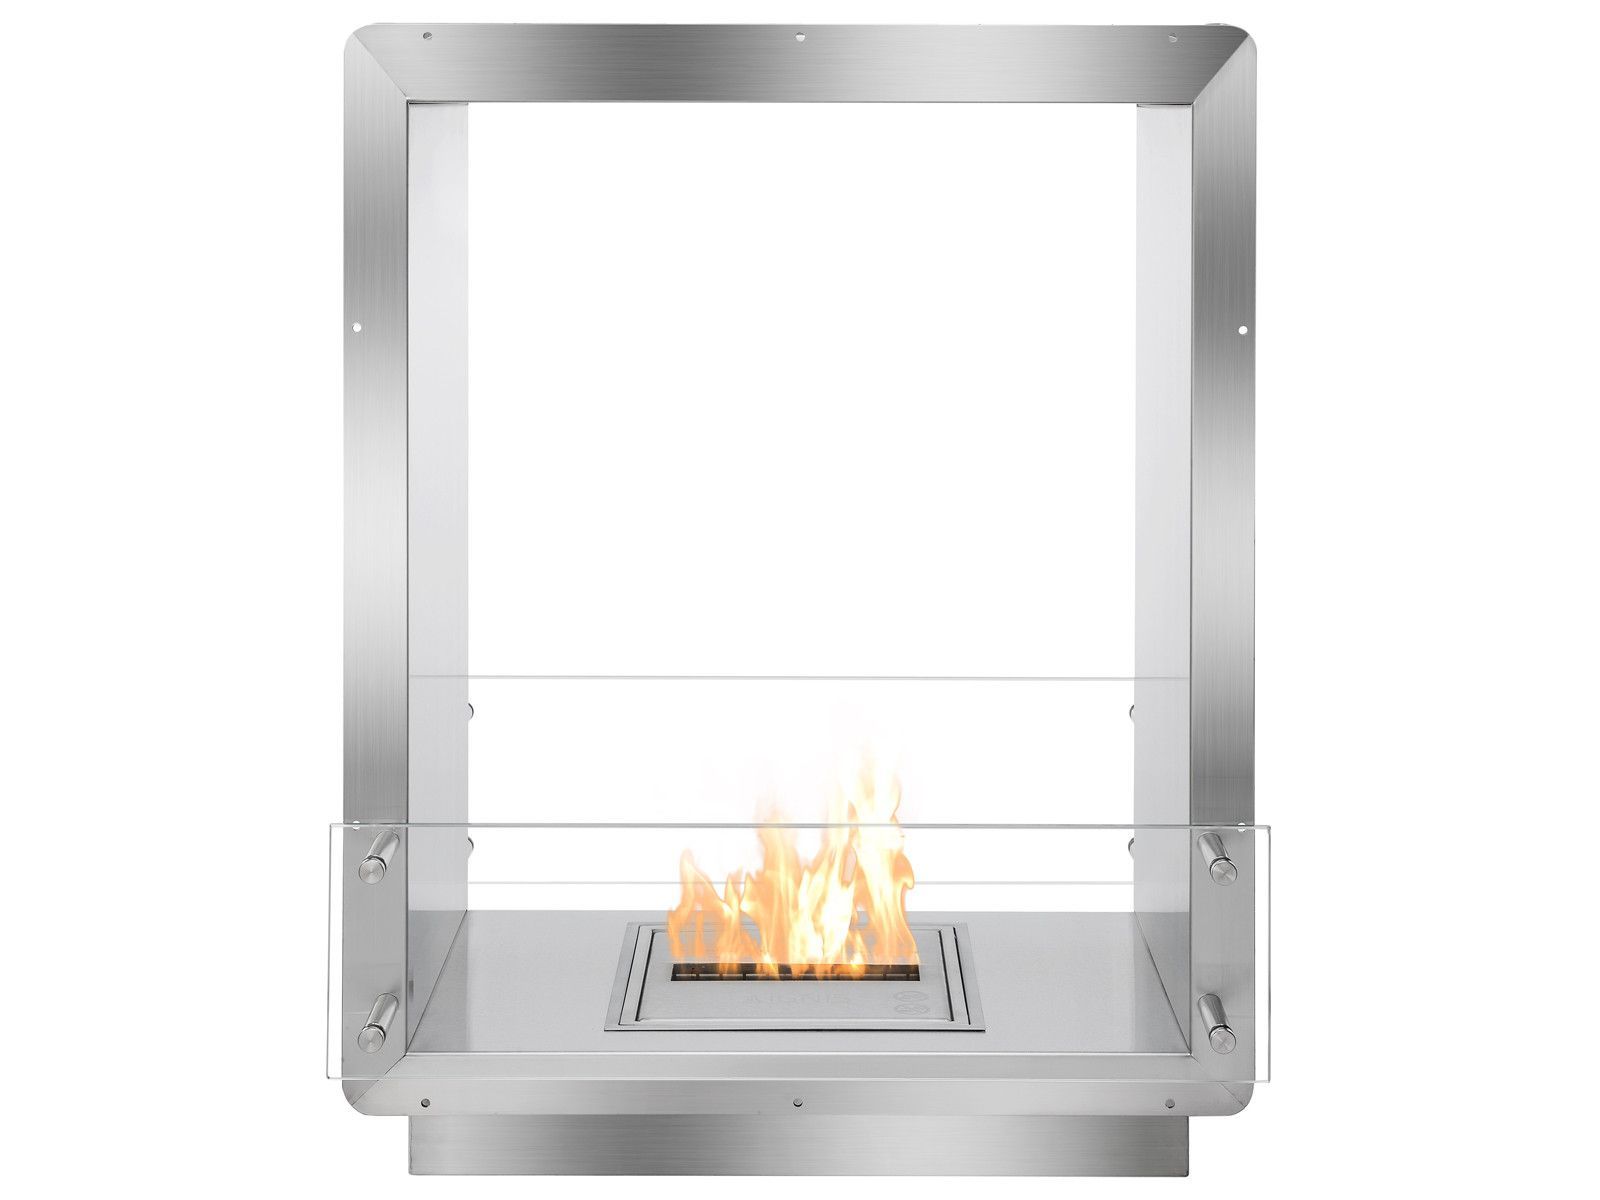 Arched Fireplace Insert Fresh Fireplace Insert Fb1212 D Products